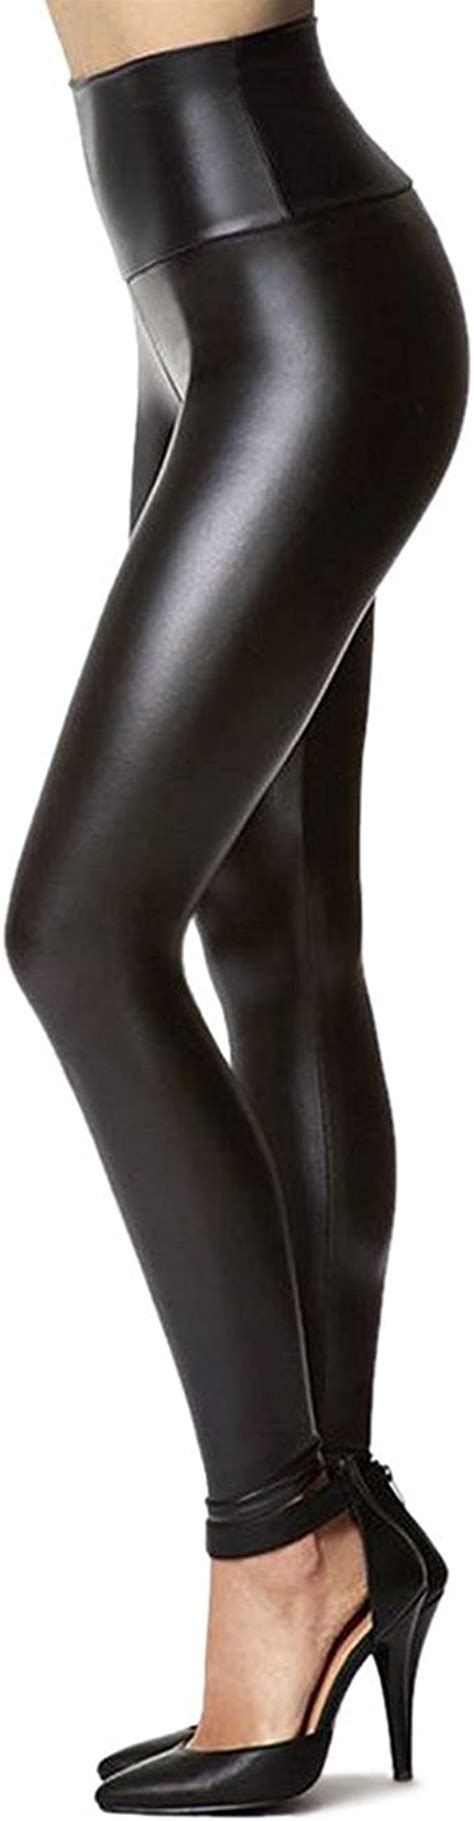 Womens Stretchy Faux Leather Leggings Pants Sexy Black High Waisted Tights Xxxx Large